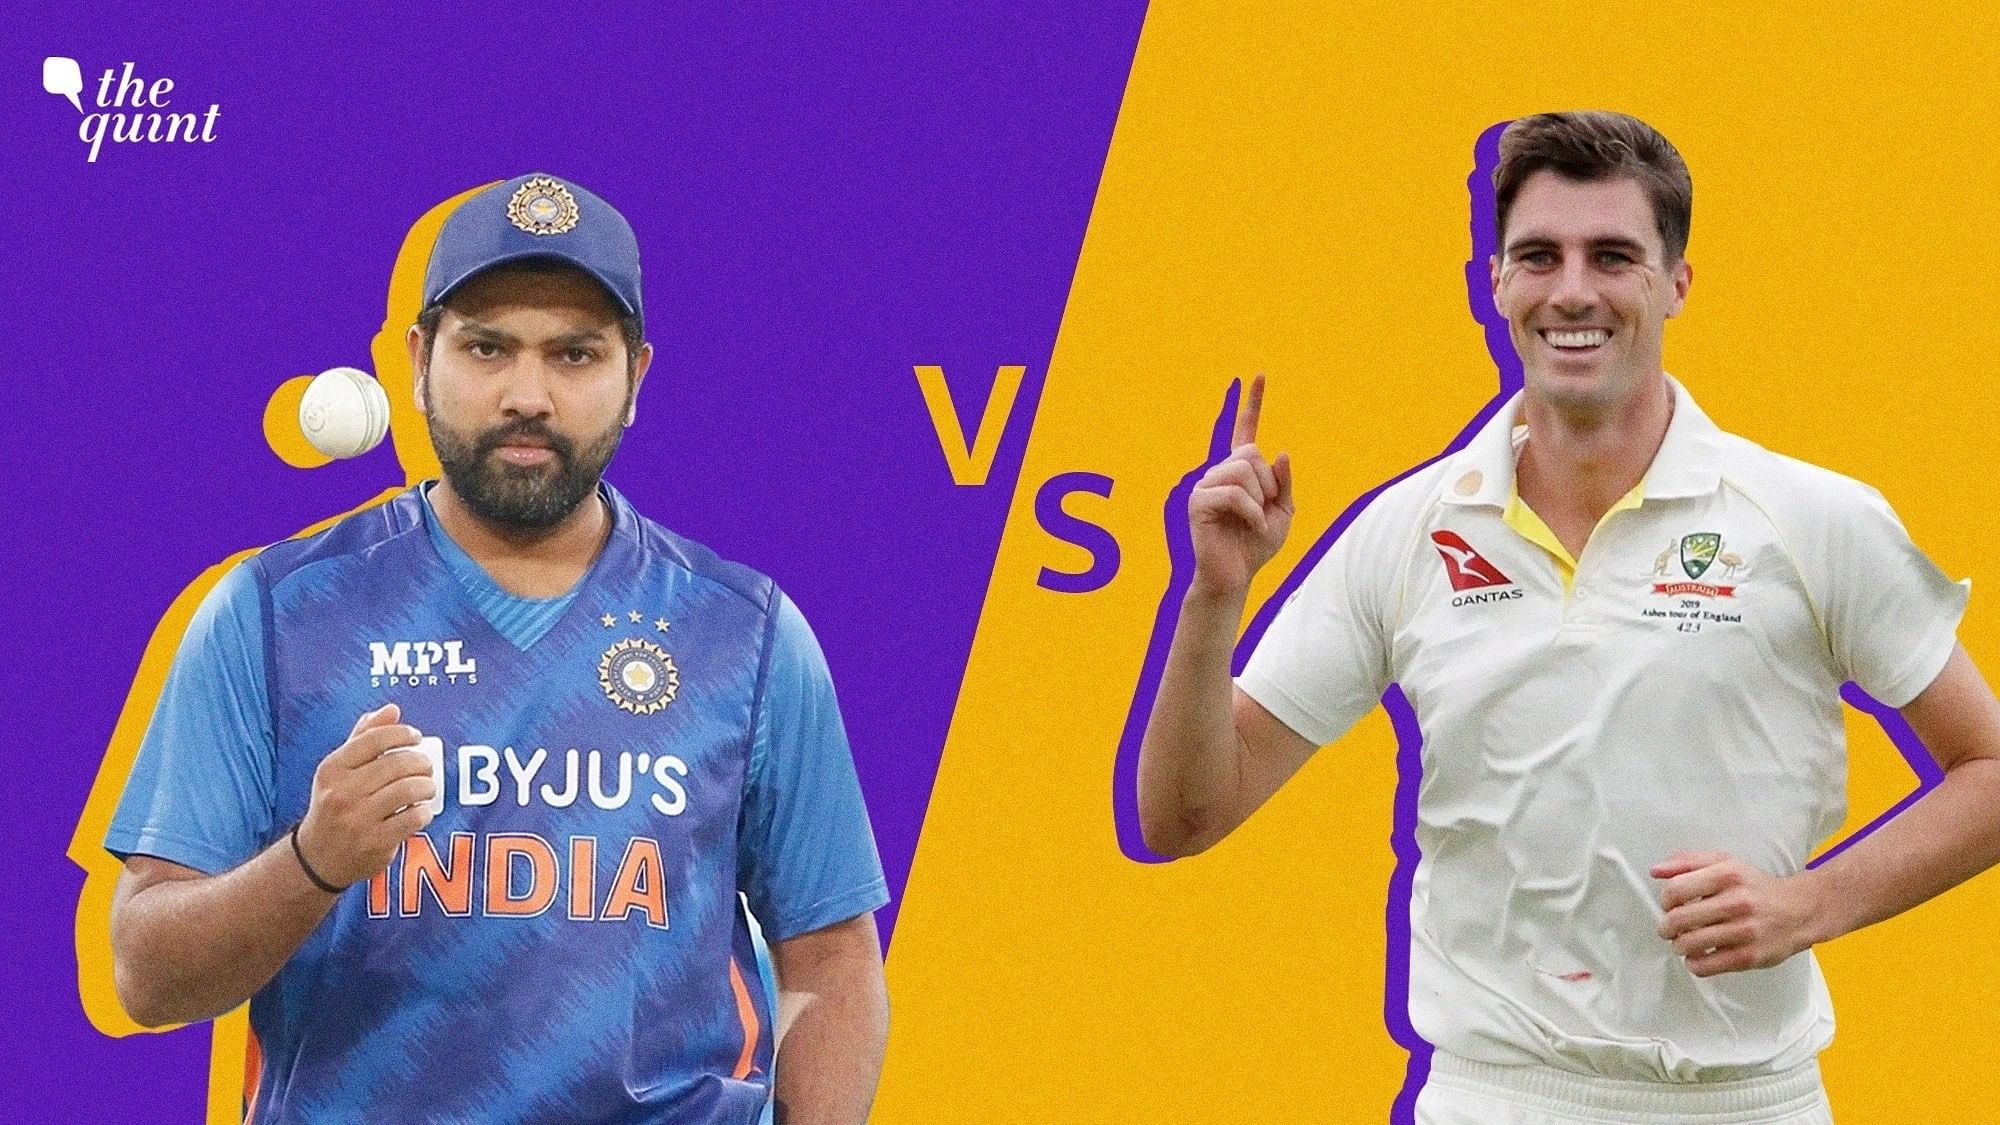 India vs Australia 2023 Ind vs Aus 3rd Test Live Streaming Know Date, Time, Venue, Broadcasting Channels, and IND vs AUS Live Streaming App Details Here